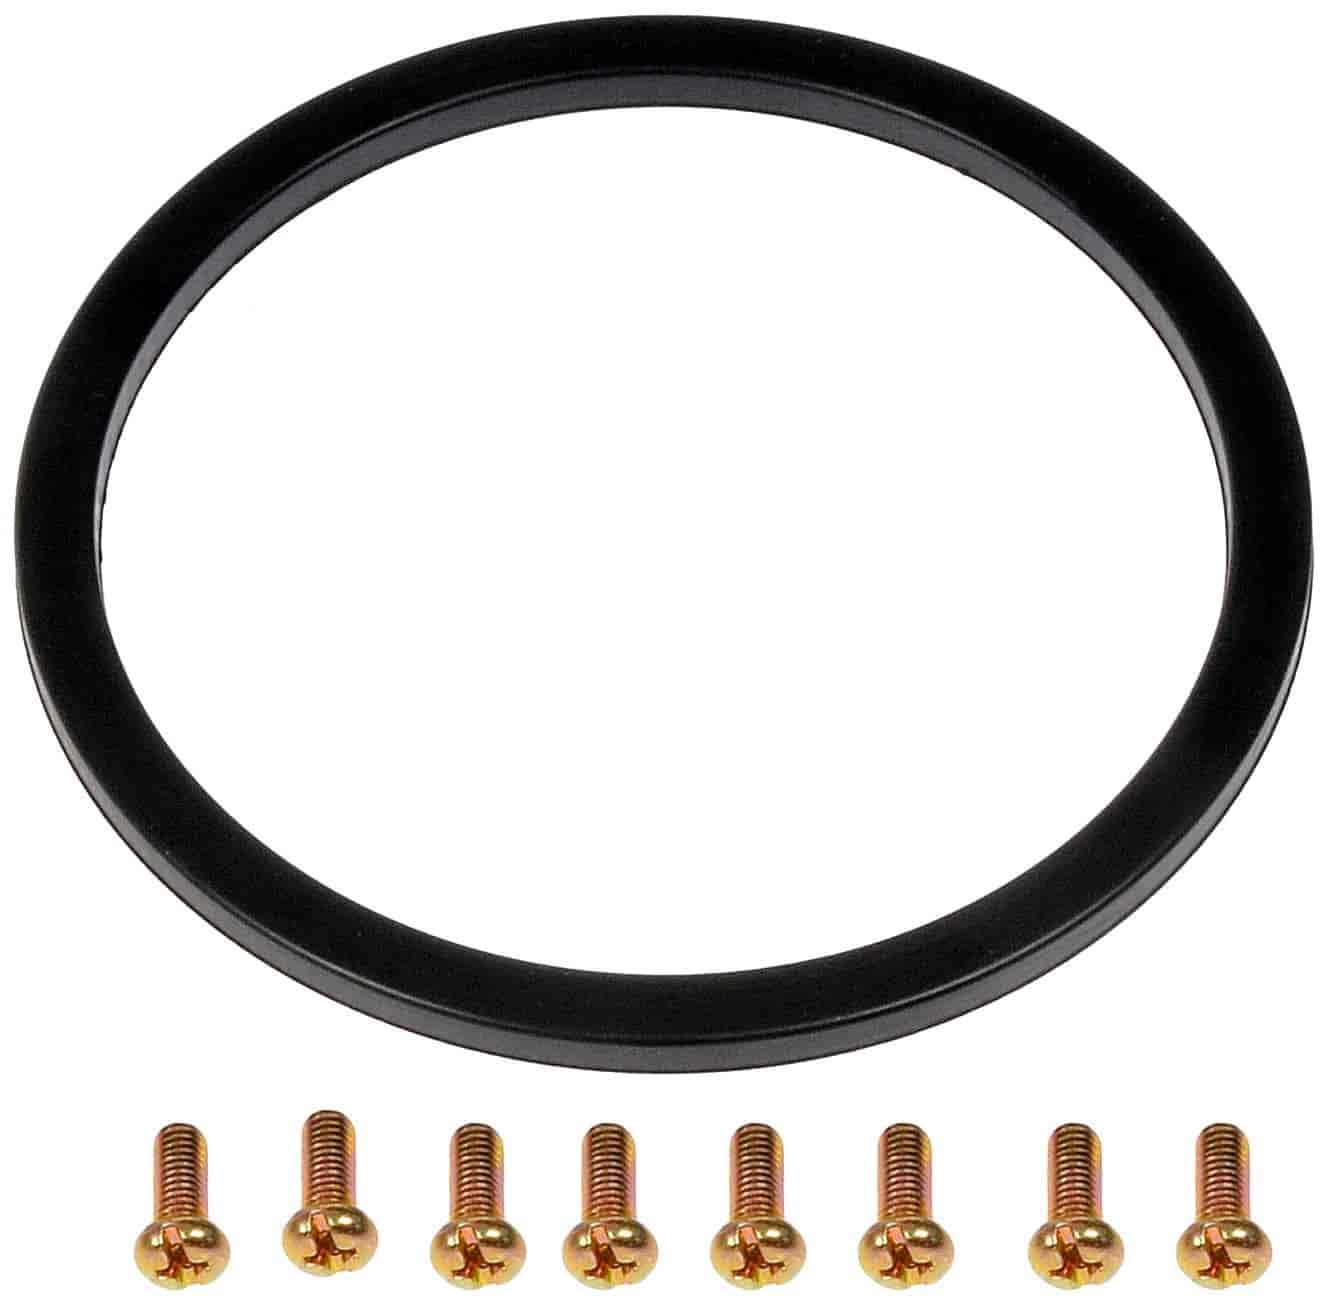 Fuel Pump Lock Ring for Select 1997-2001 Toyota/Lexus Models